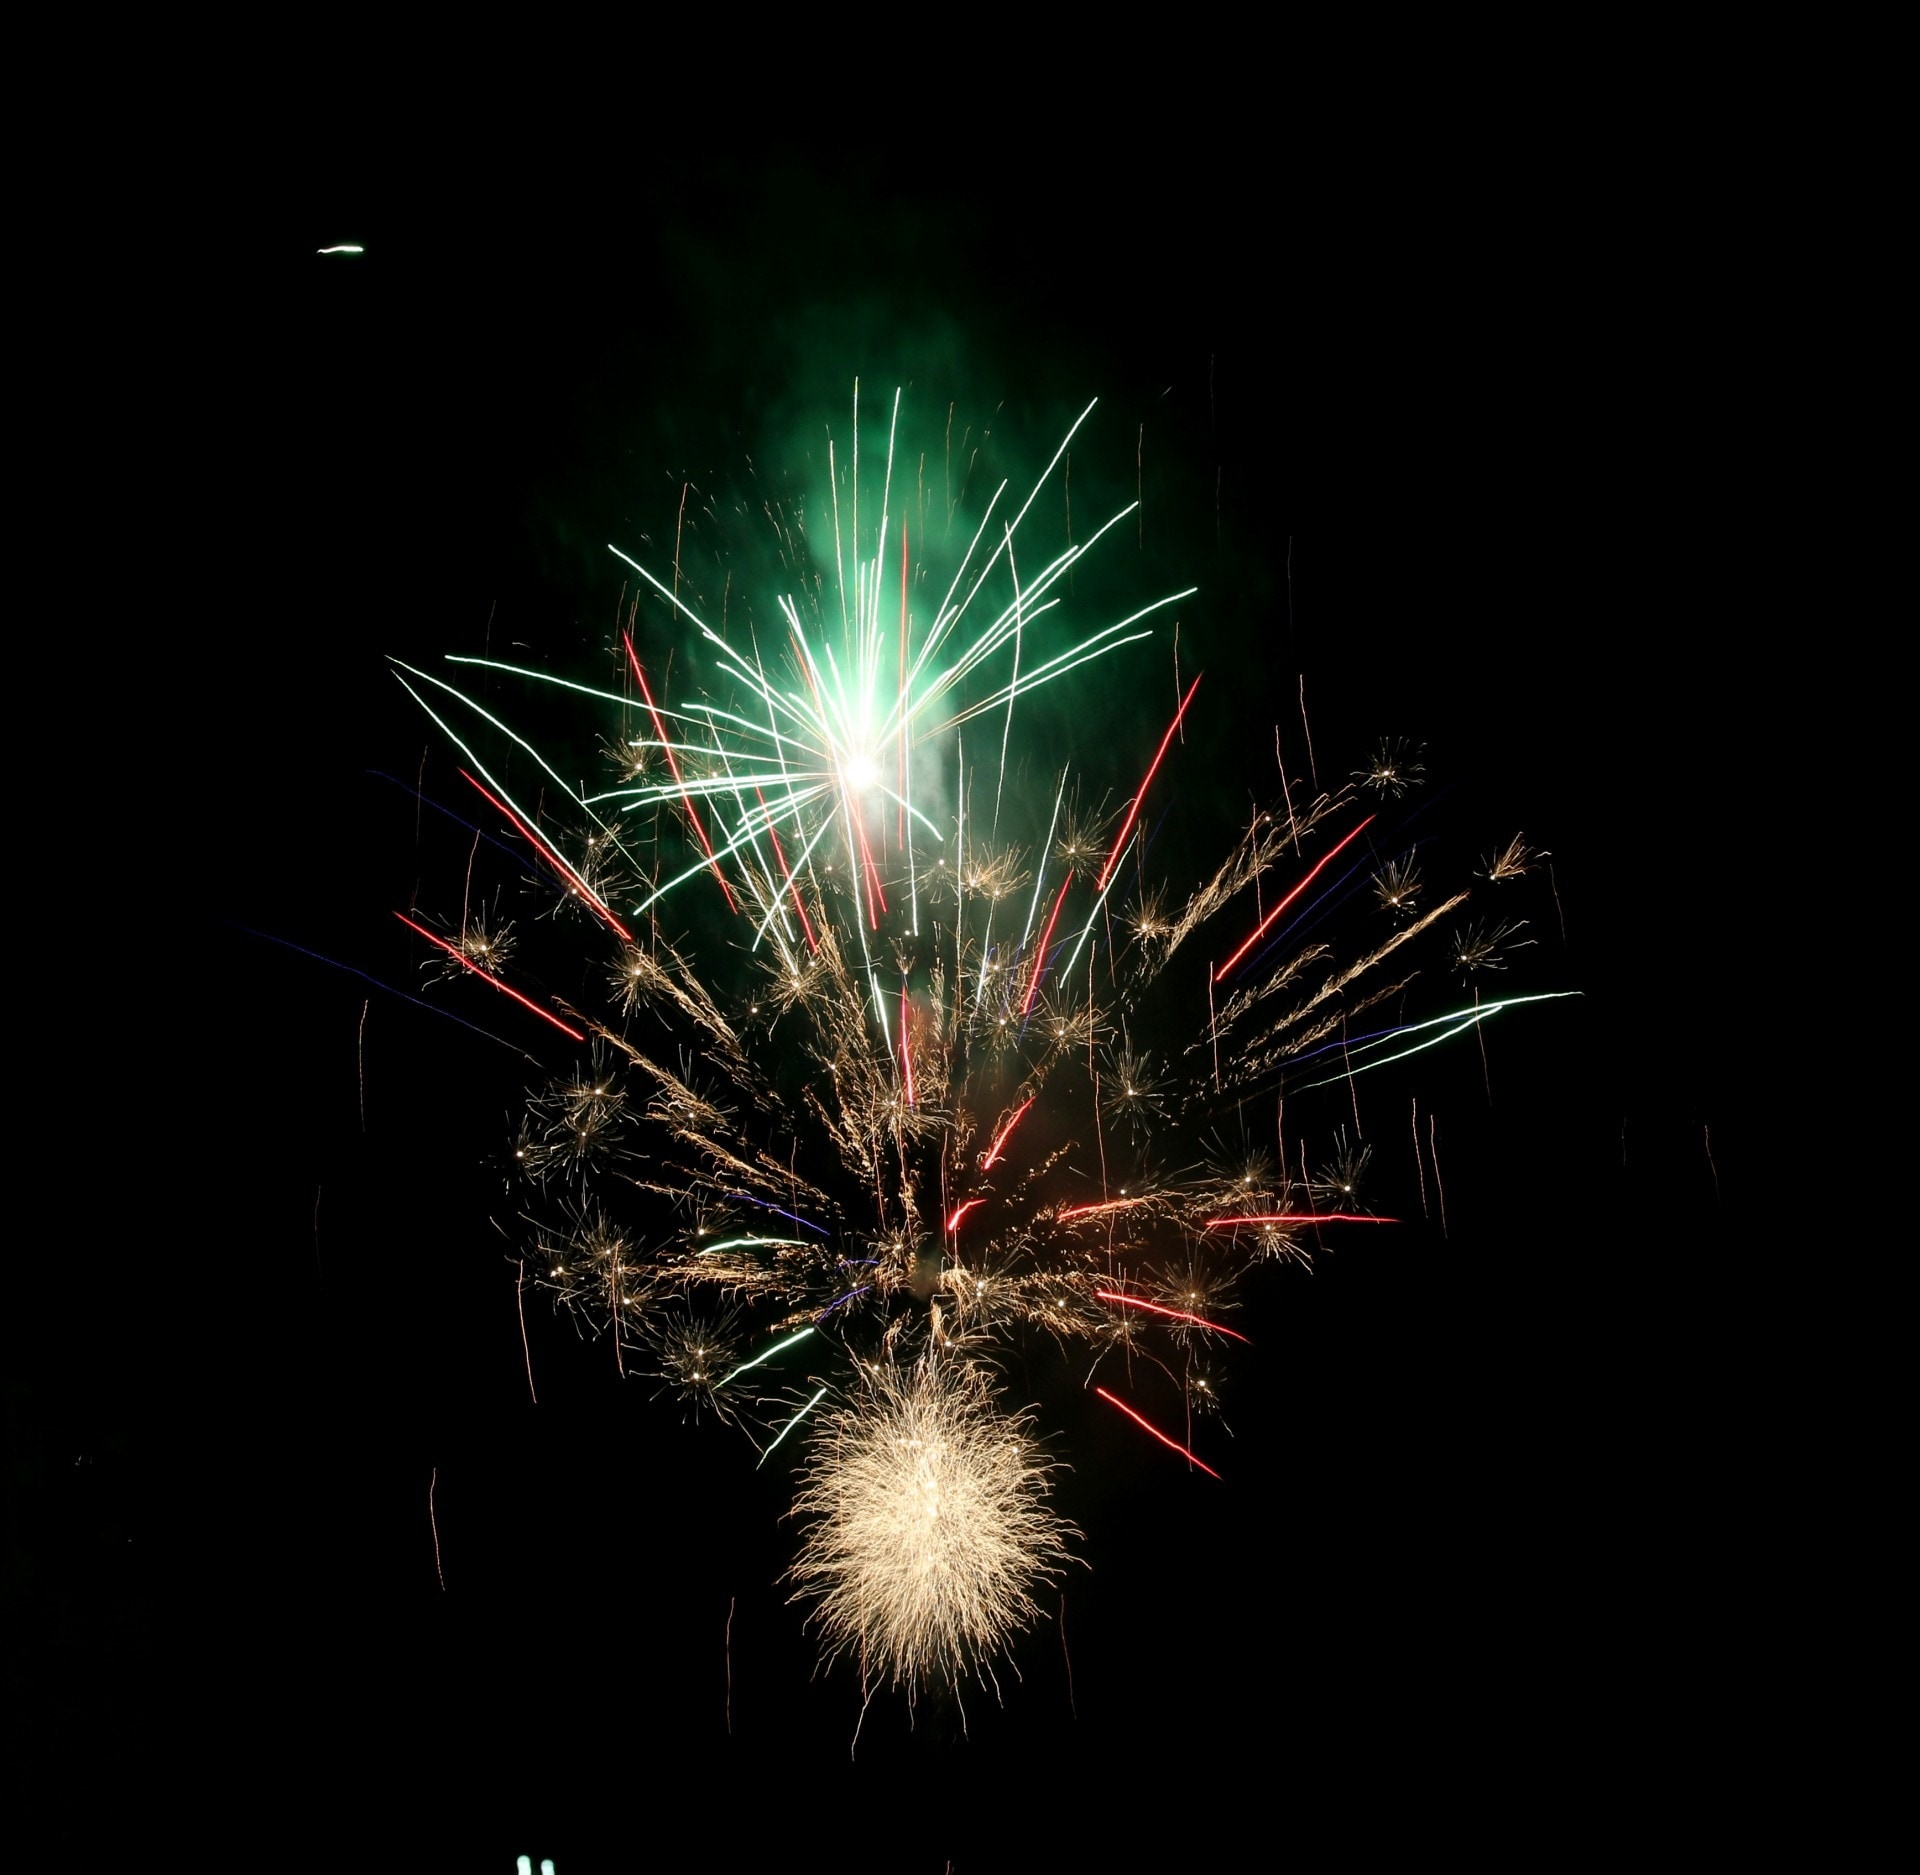 photo of fireworks